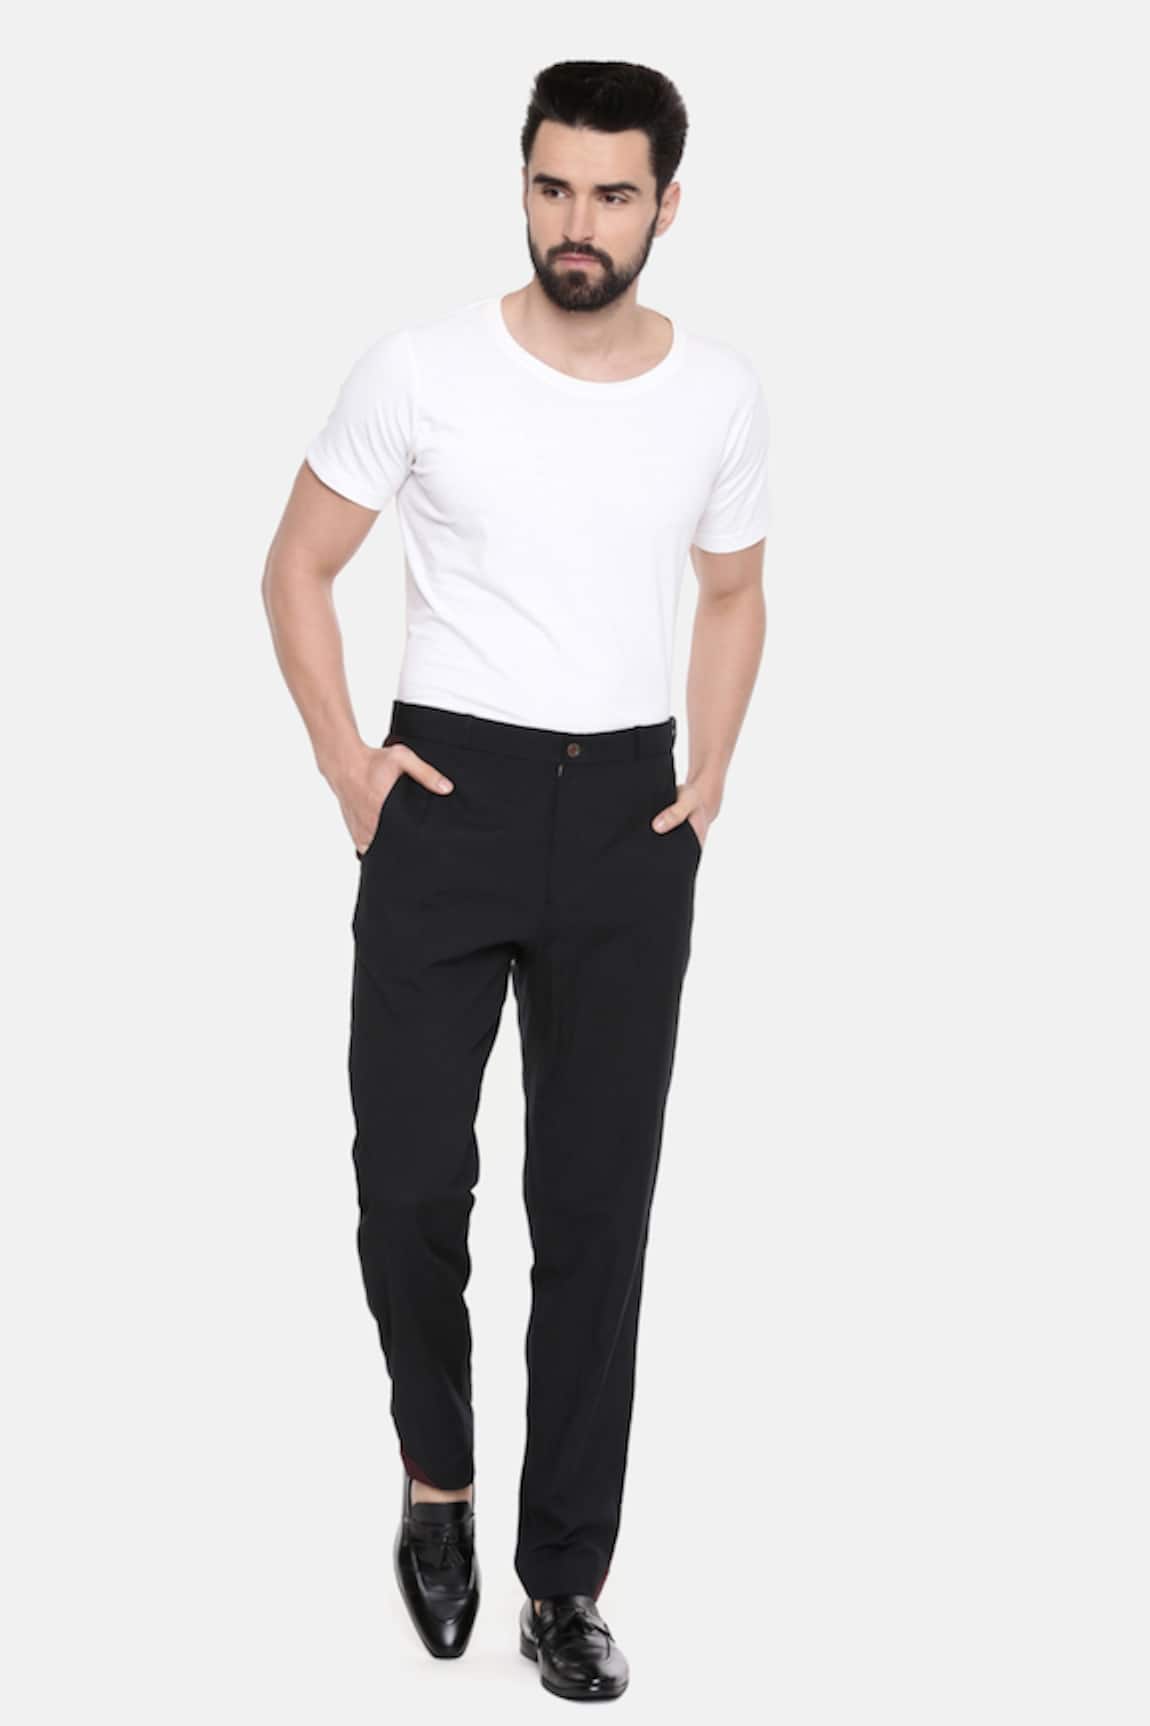 Buy Black Trousers  Pants for Men by UNITED COLORS OF BENETTON Online   Ajiocom